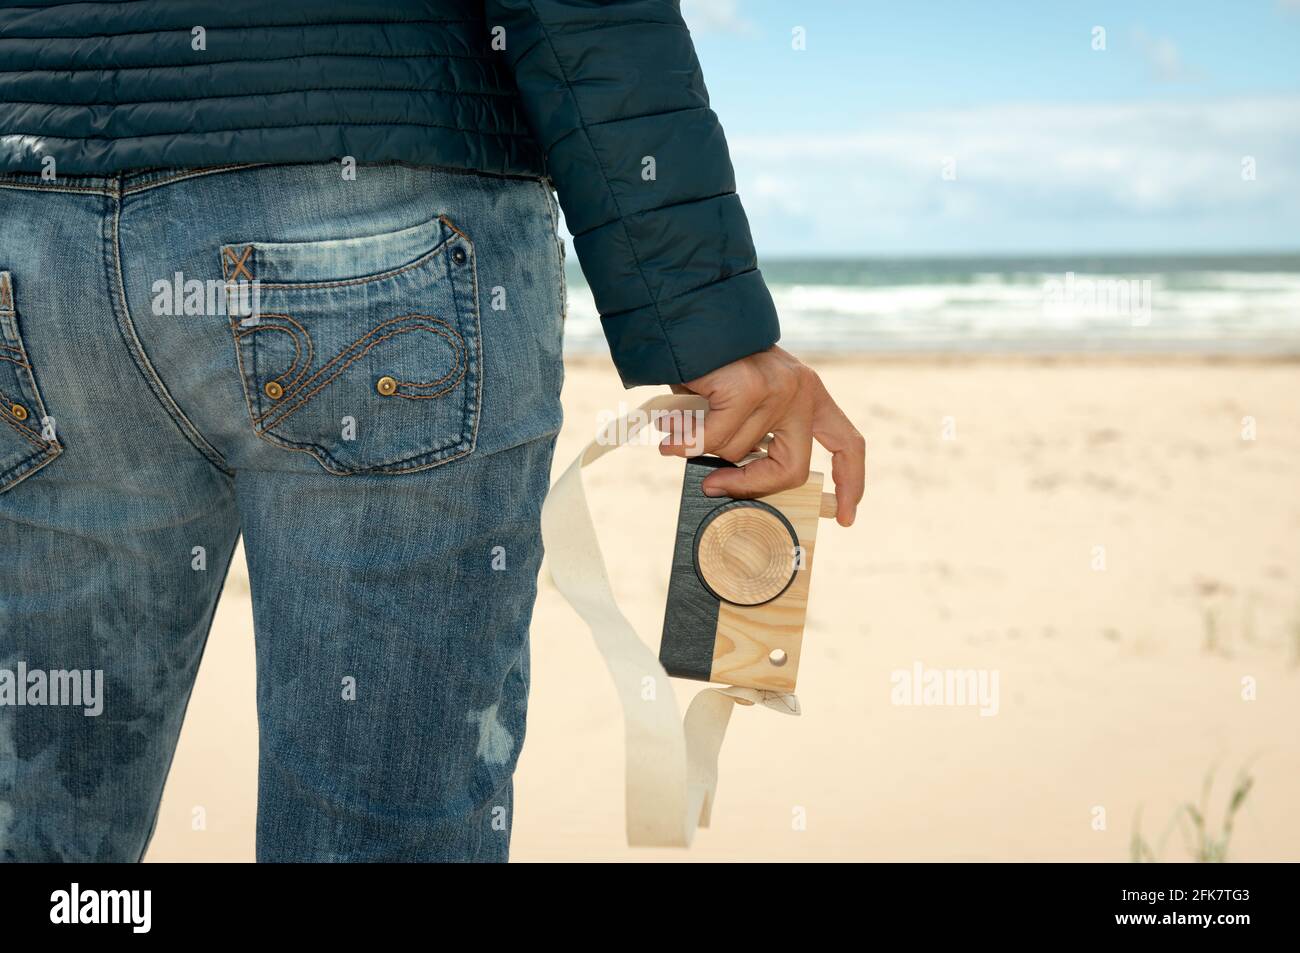 Close-up of woman's hand holding an wooden toy photo camera against sandy beach background. Fun photography concept. Stock Photo